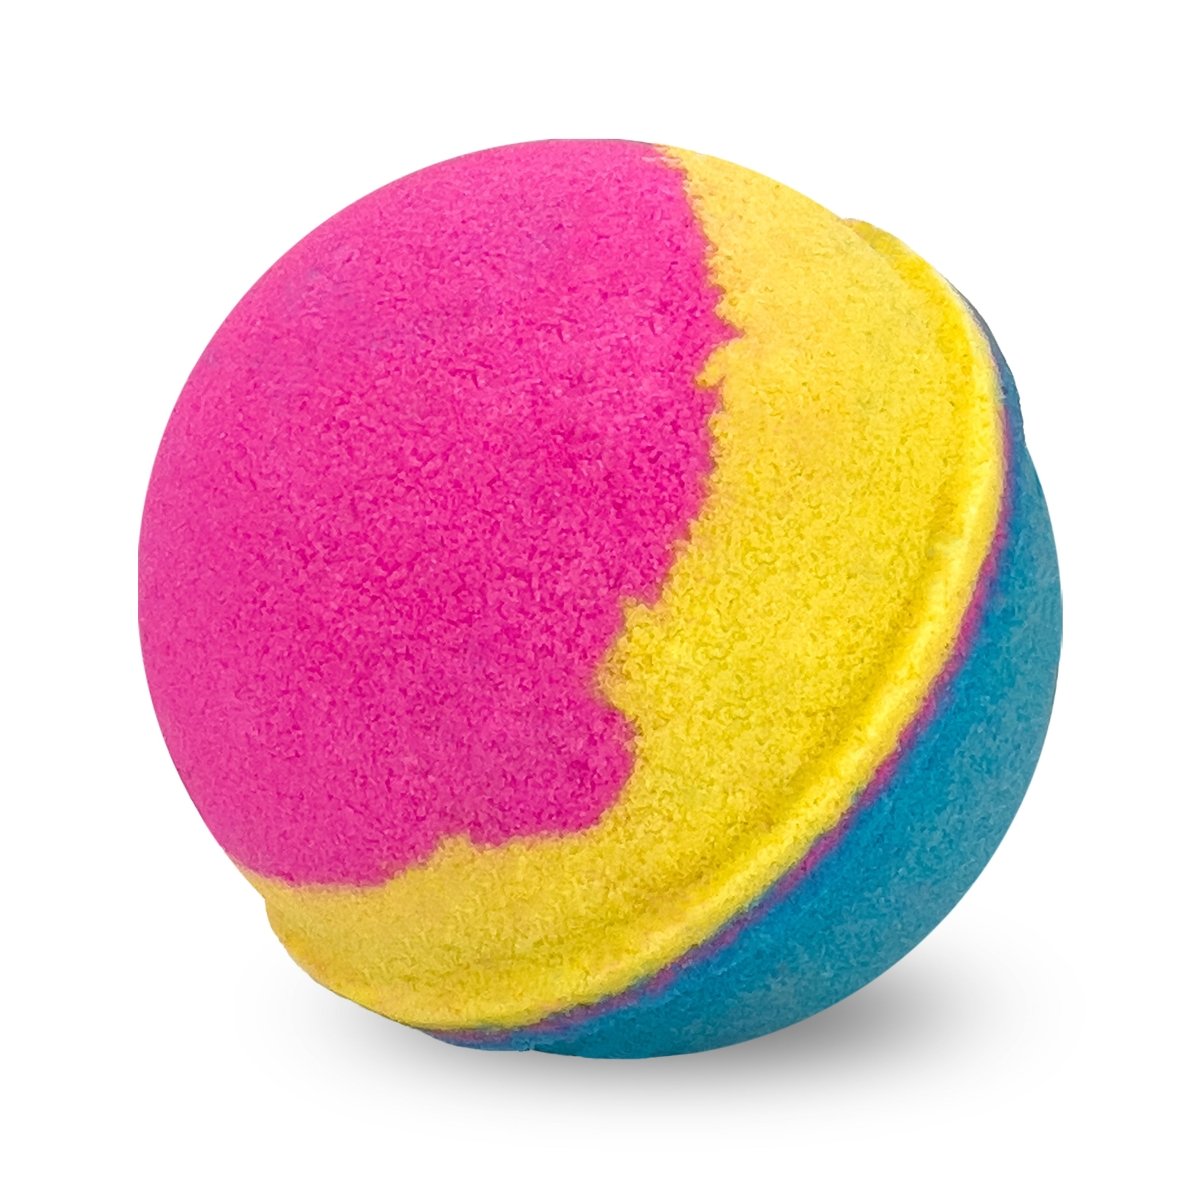 Wild Child Bath Bomb for Kids & Adults - Large Colourful Glitters & Cake Batter Fragrance - Made in Australia by Bath Box